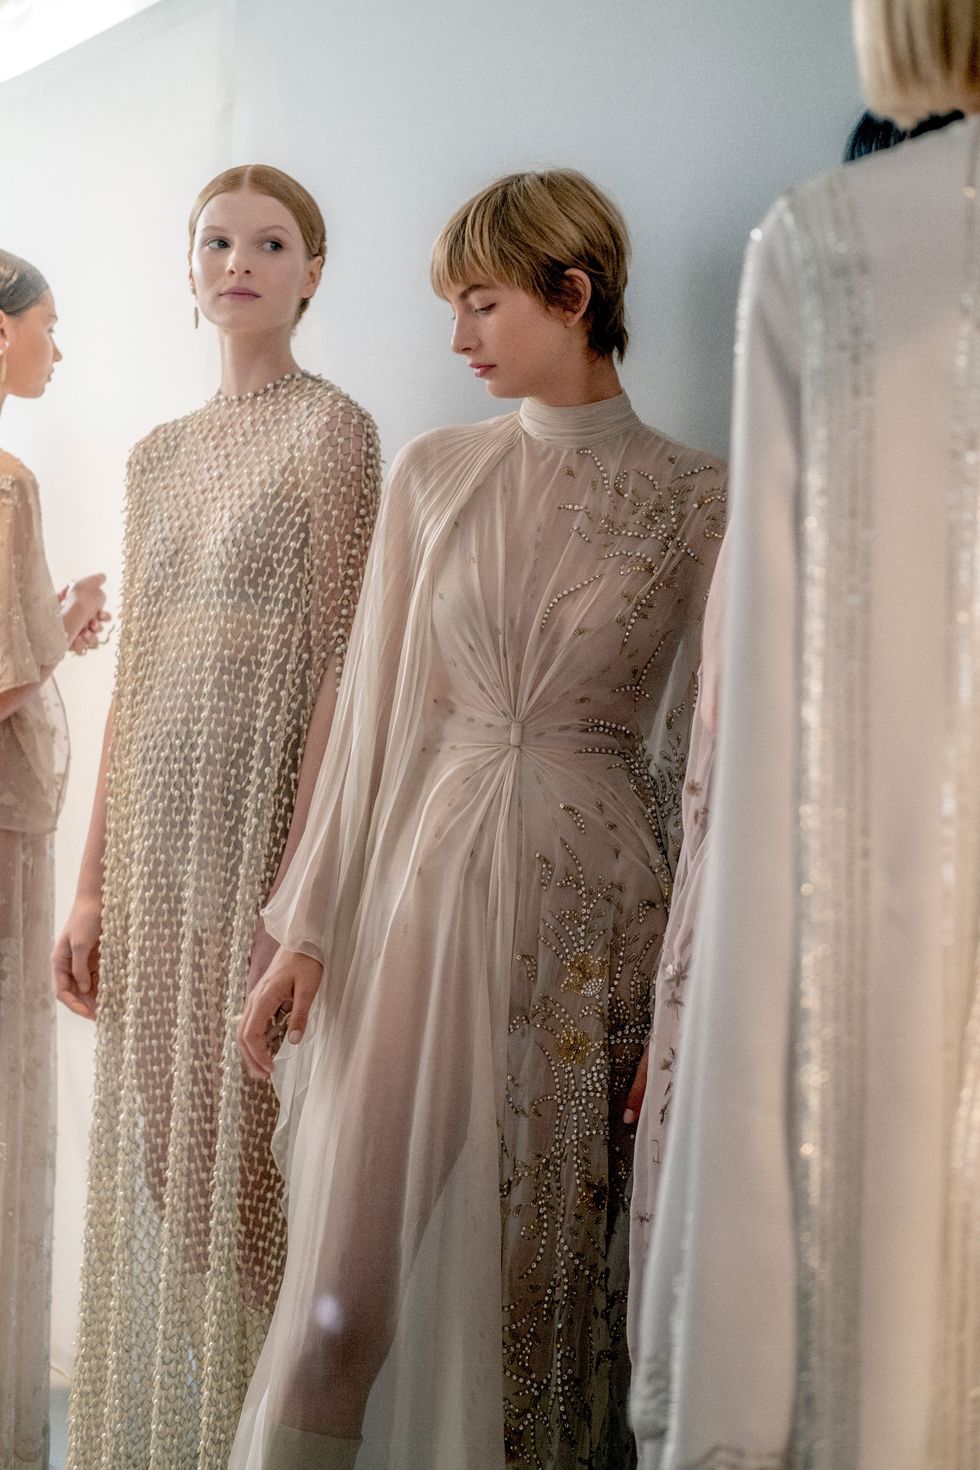 Behind the scenes of Dior's Haute Couture looks